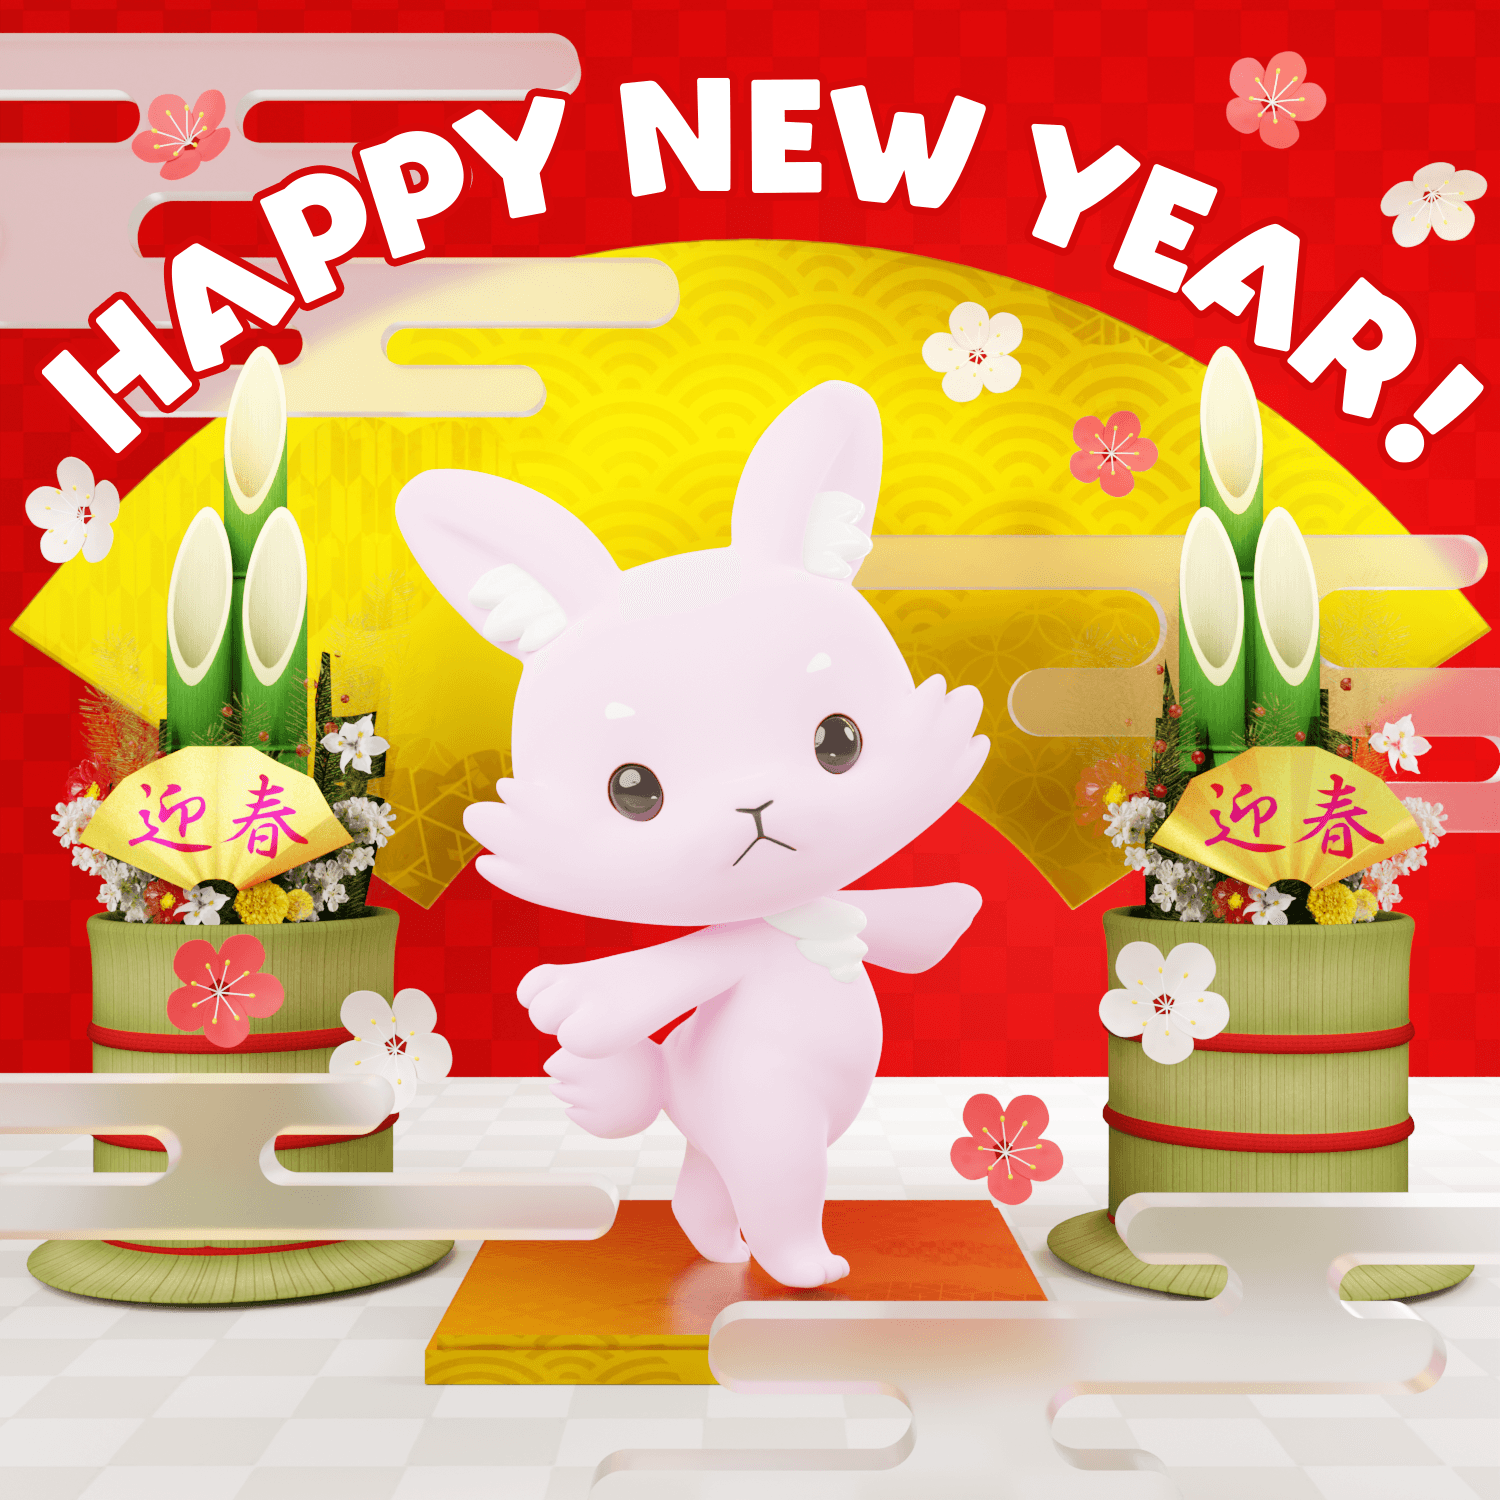 3D LEELEE Items - New Year's card 2023